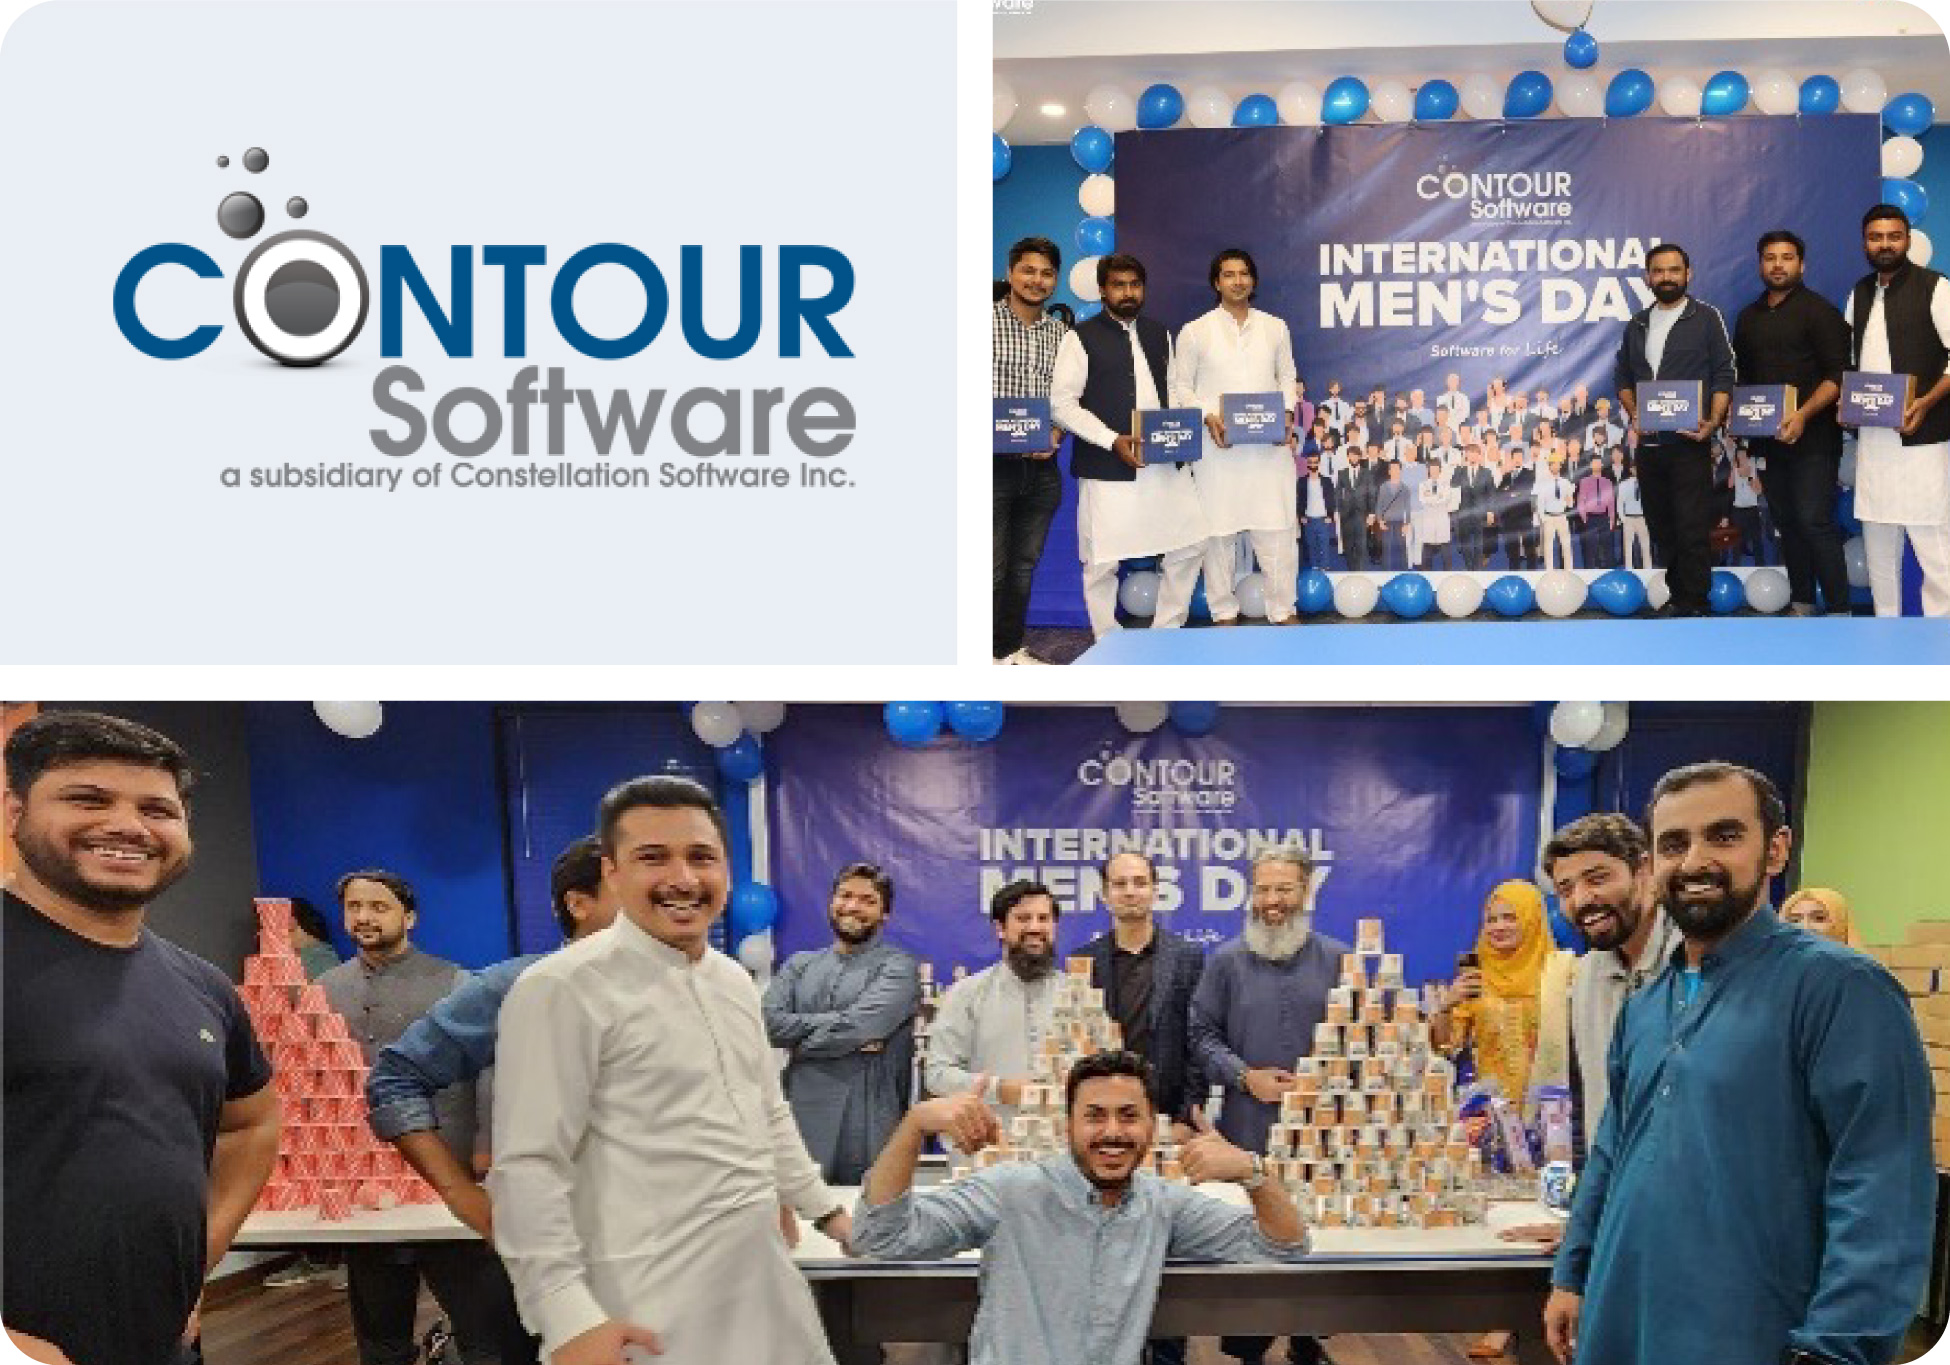 Photo collage of Contour Software employees celebrating International Men's Day